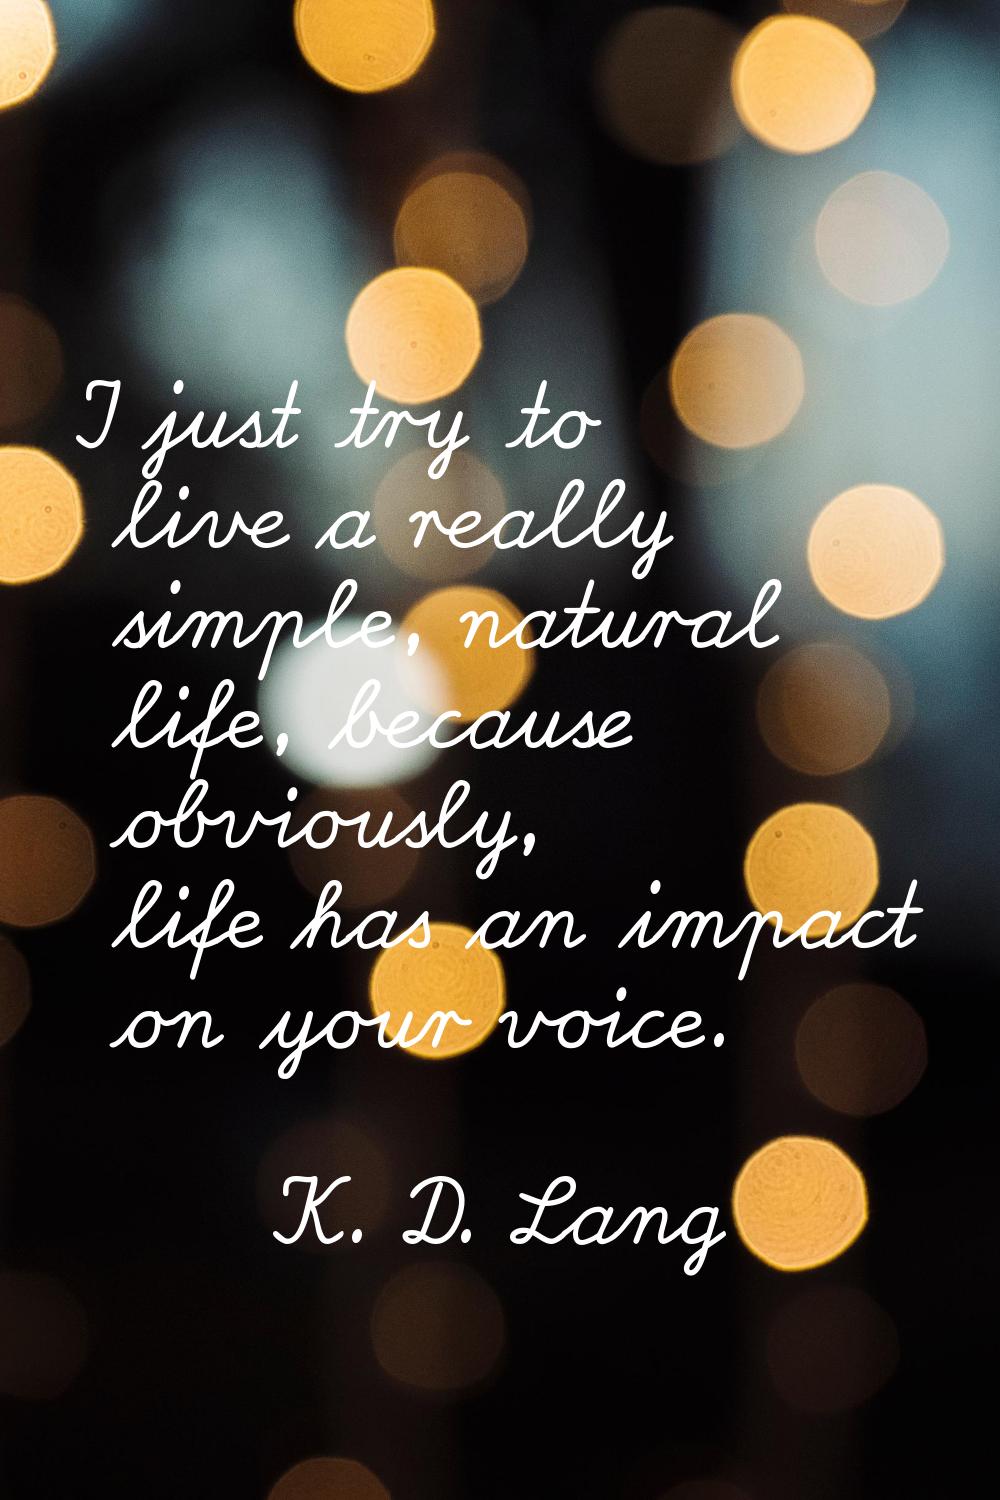 I just try to live a really simple, natural life, because obviously, life has an impact on your voi